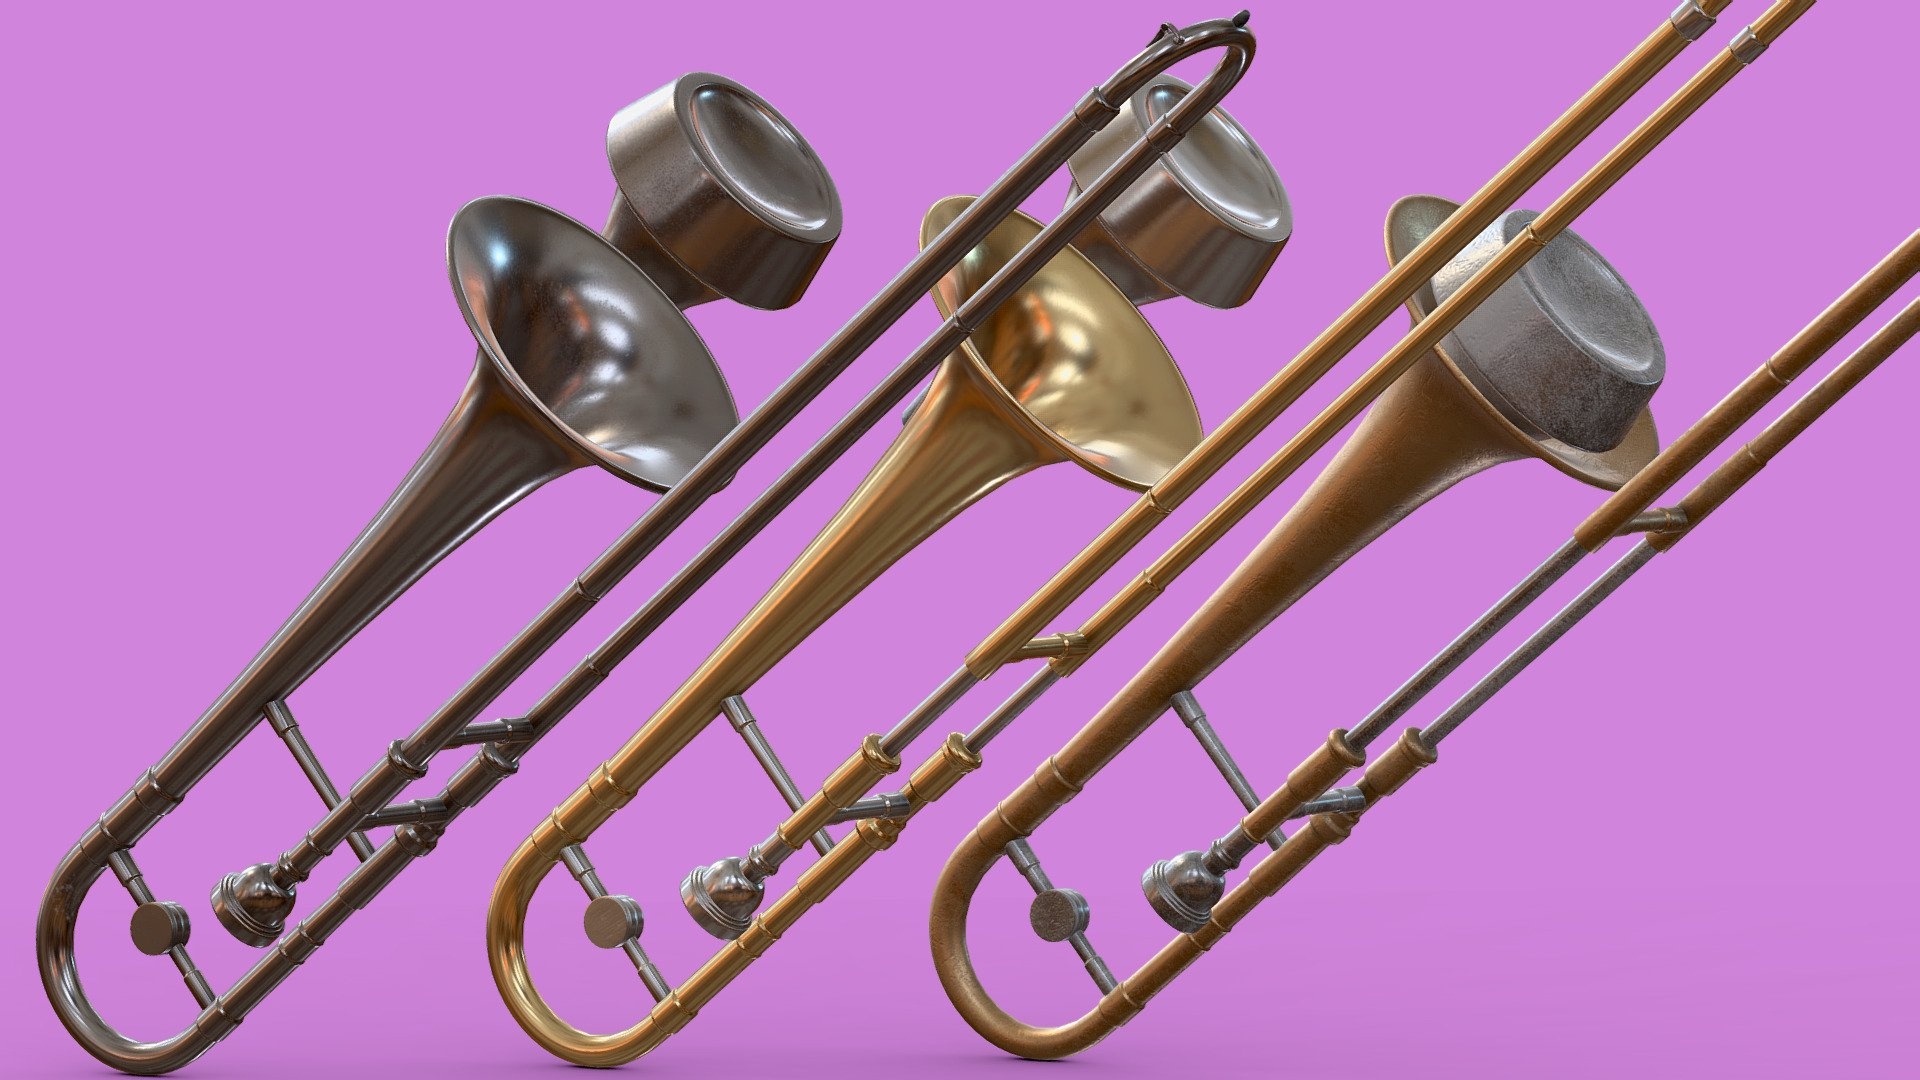 Trombone: A brass instrument, Movable slide or valves for varying the tone, Musical instruments. 1920x1080 Full HD Wallpaper.